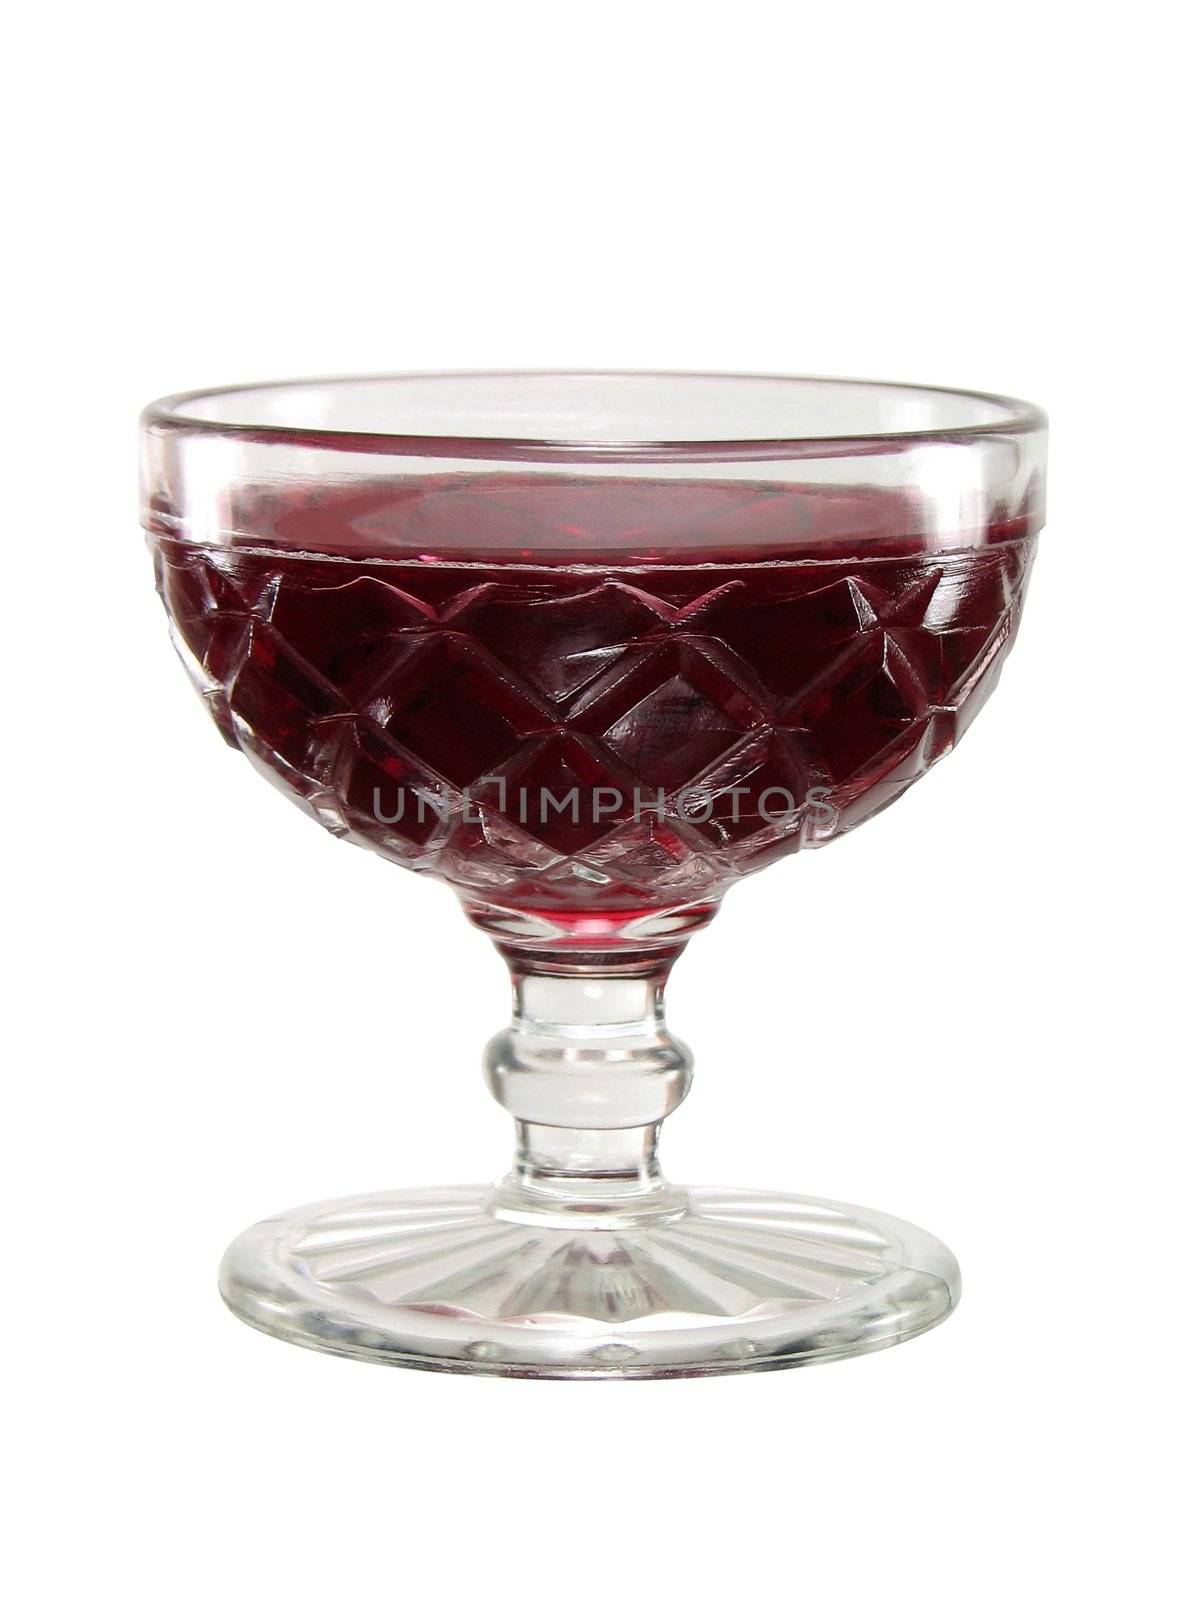 Red jelly in a vintage glass bowl by anikasalsera